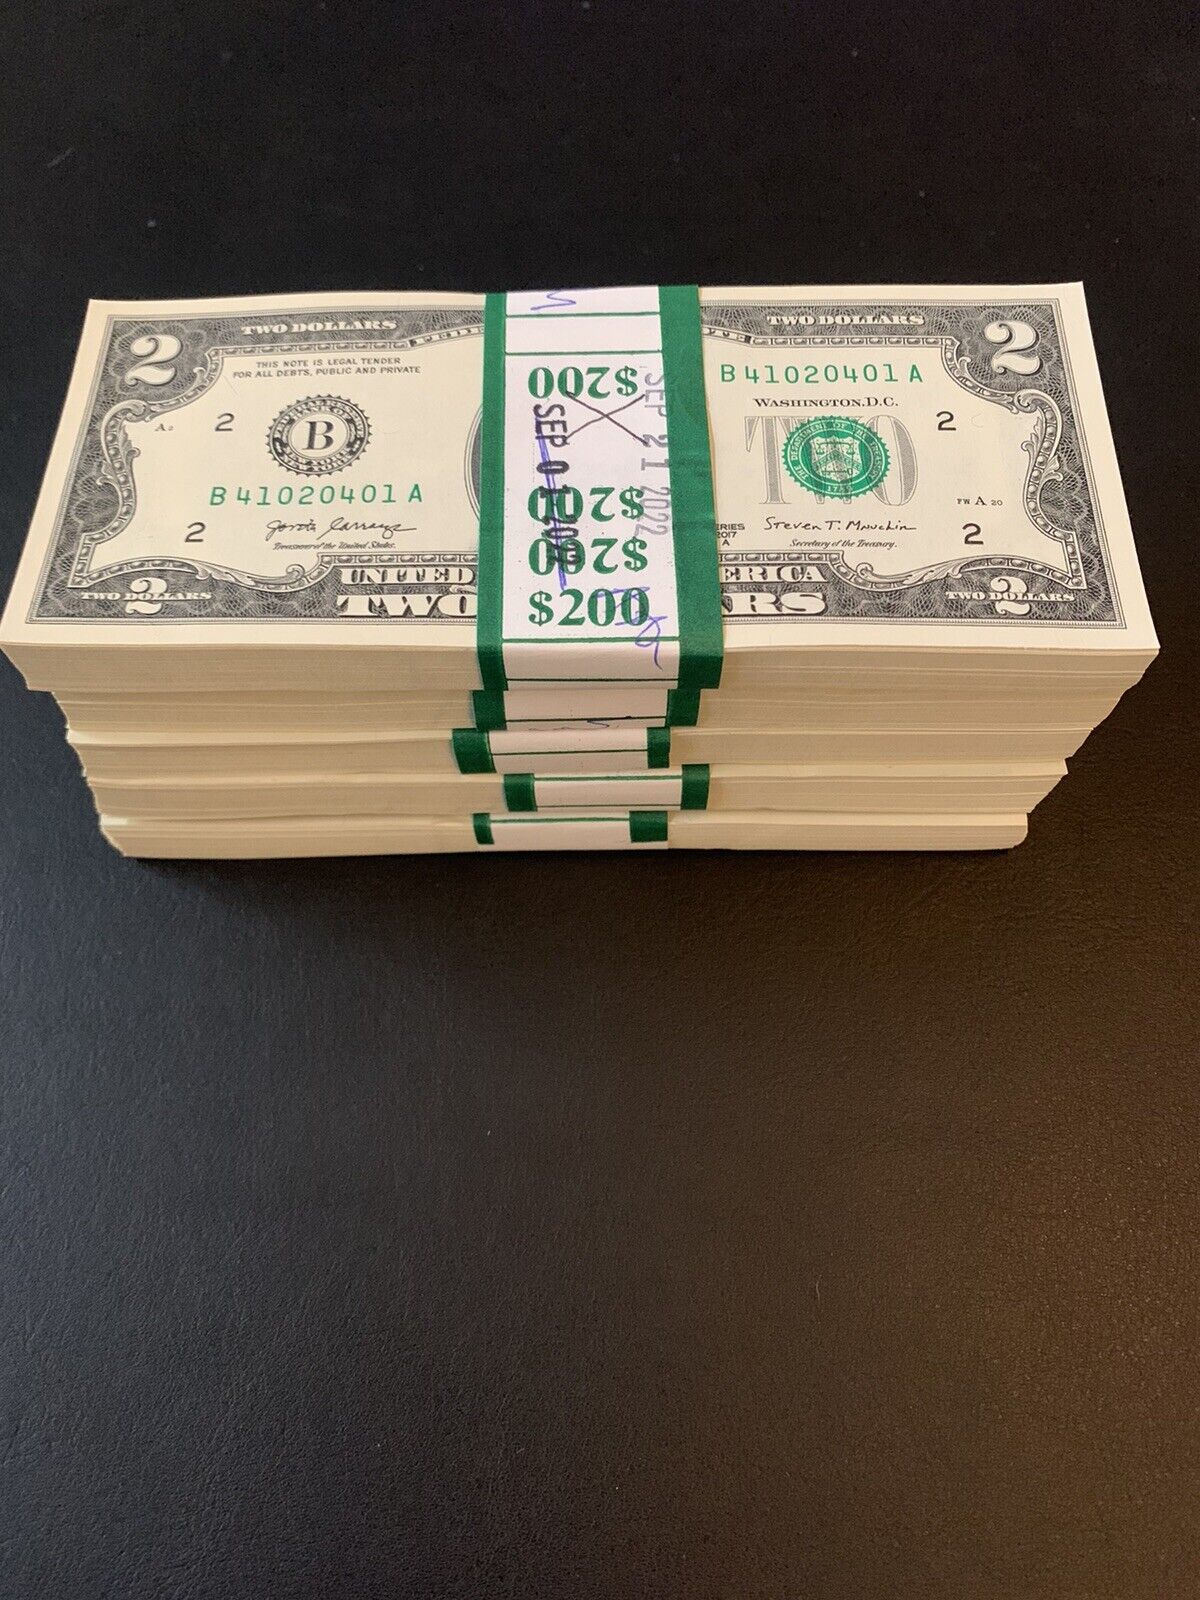 25 ($2) TWO DOLLAR BILLS UNCIRCULATED SEQUENCIAL - Buy More Save More